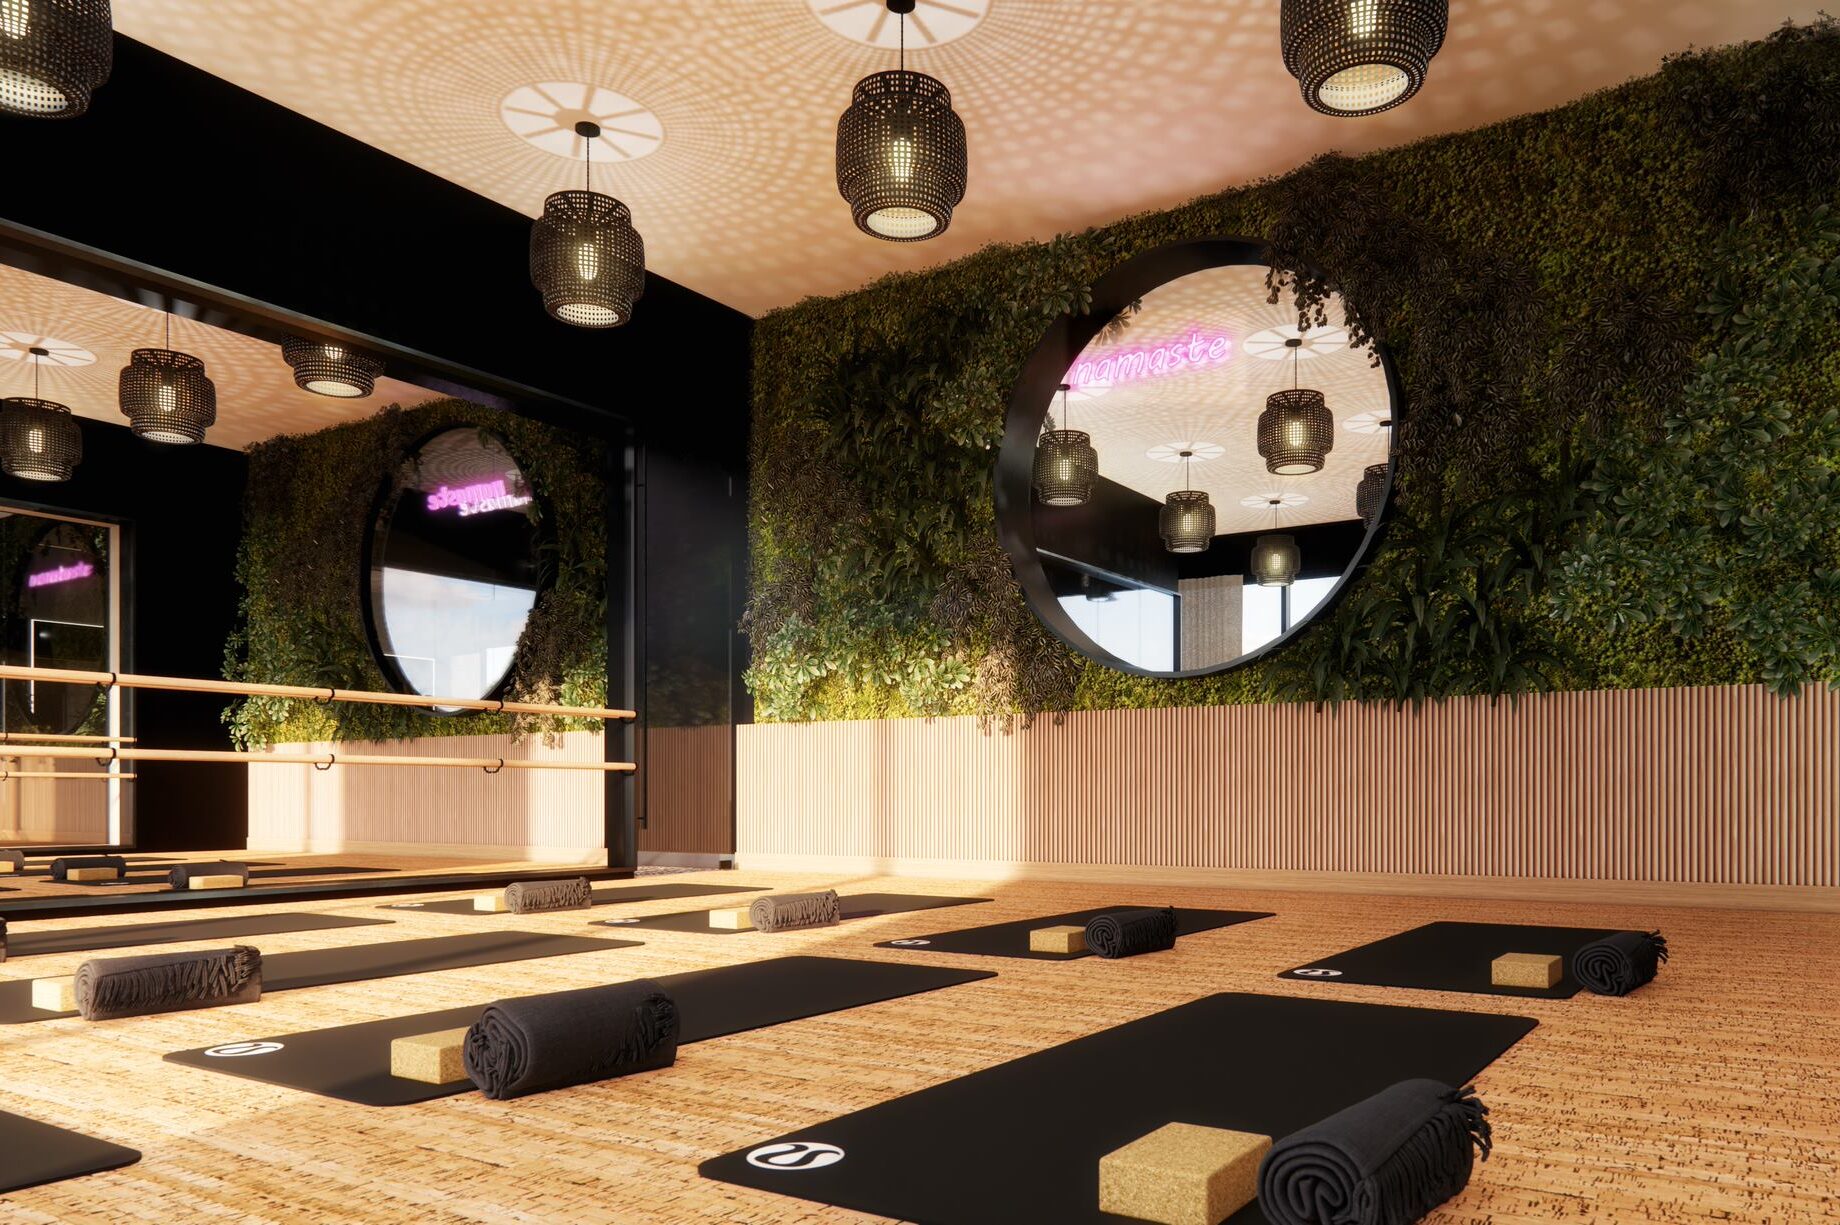 rendering of yoga room at Waterloo Tower, student housing apartment in West Campus near UT Austin.